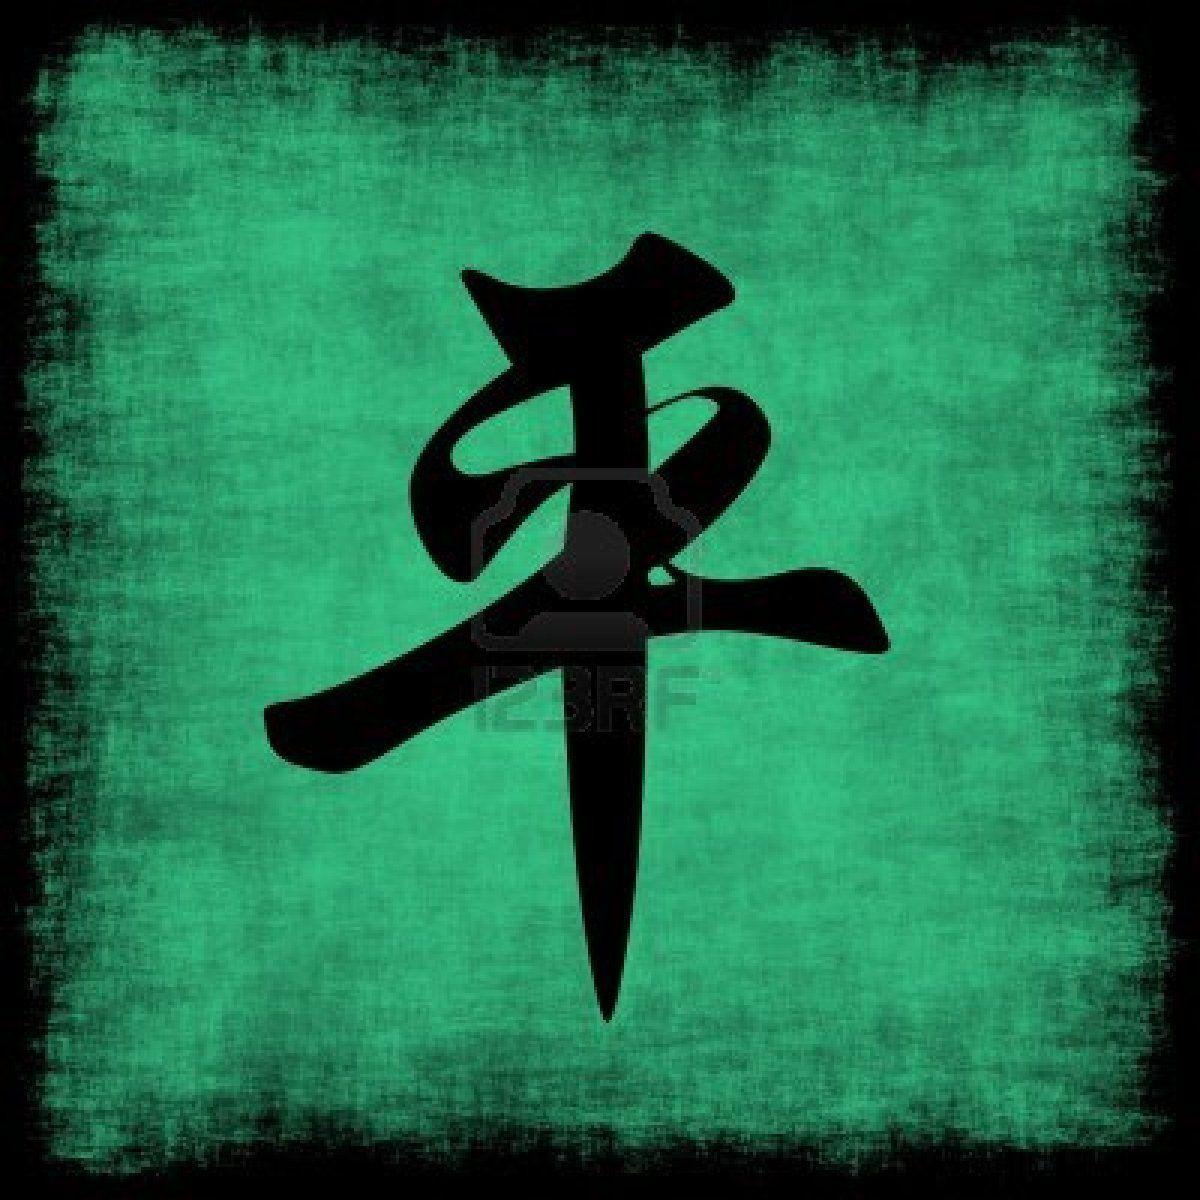 Chinese Symbol Wallpapers